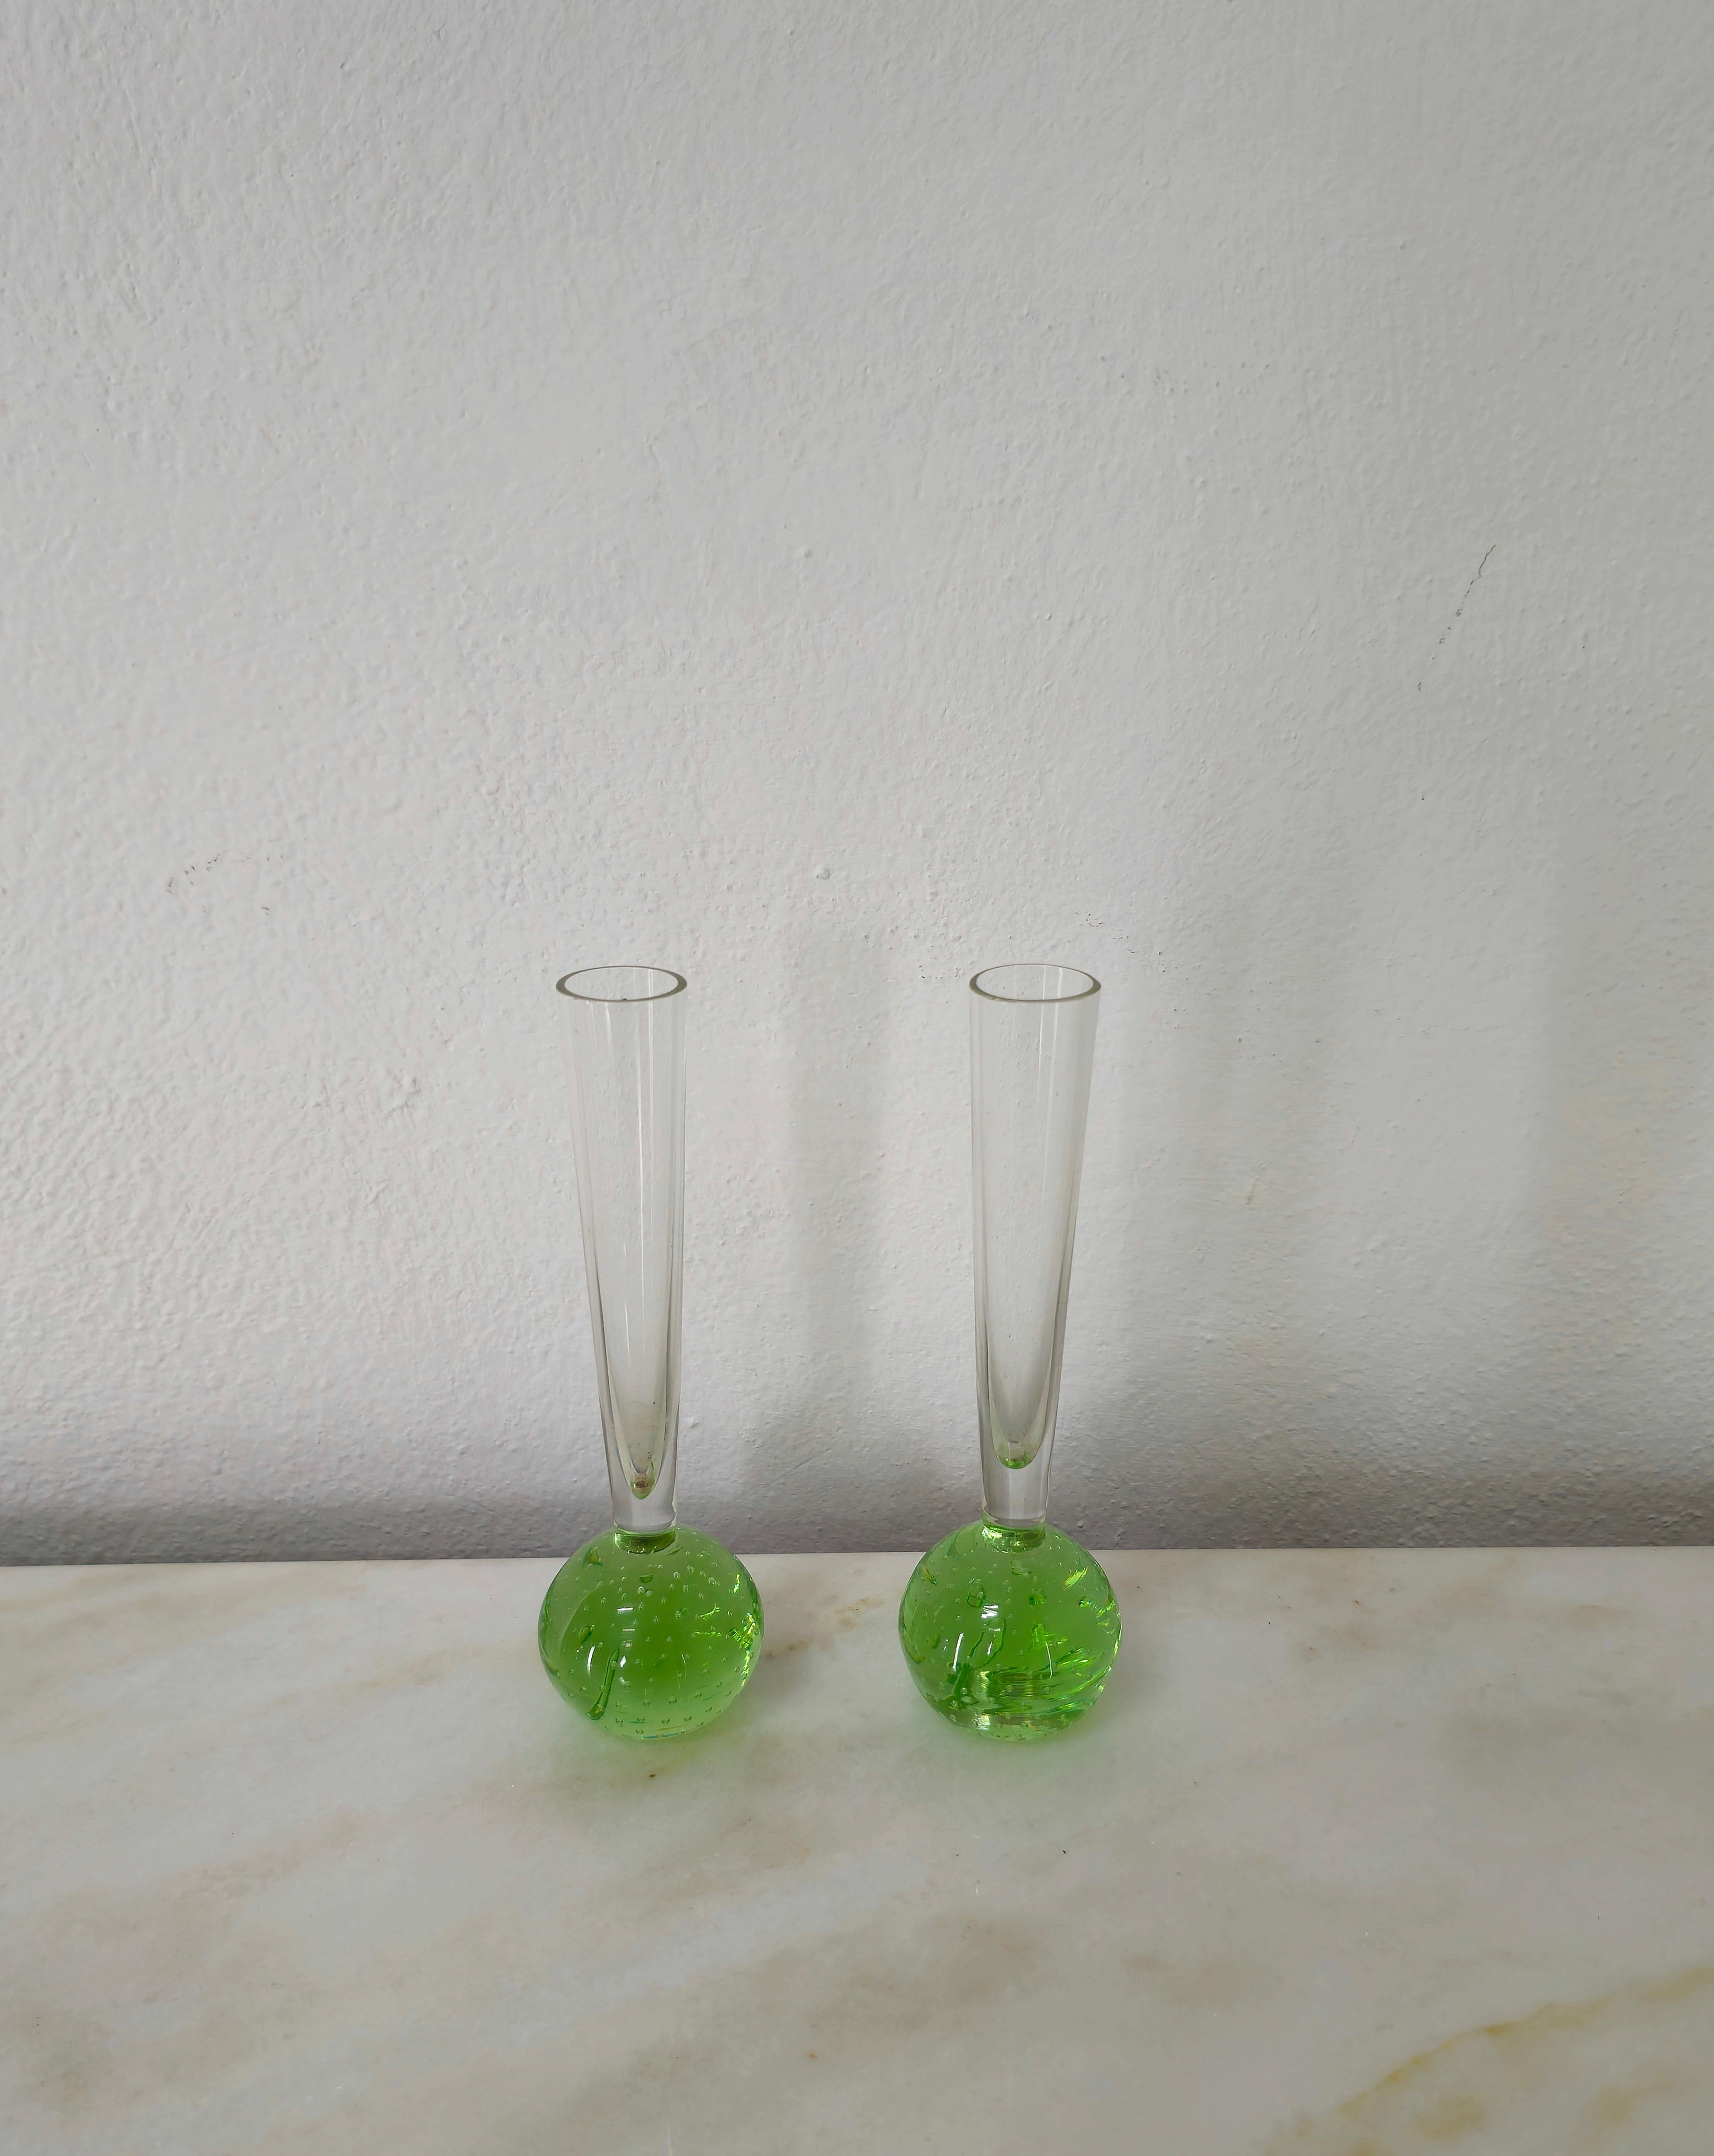 Decorative Objects Vases Murano Glass Midcentury Italian Design 1970s Set of 2 In Good Condition For Sale In Palermo, IT